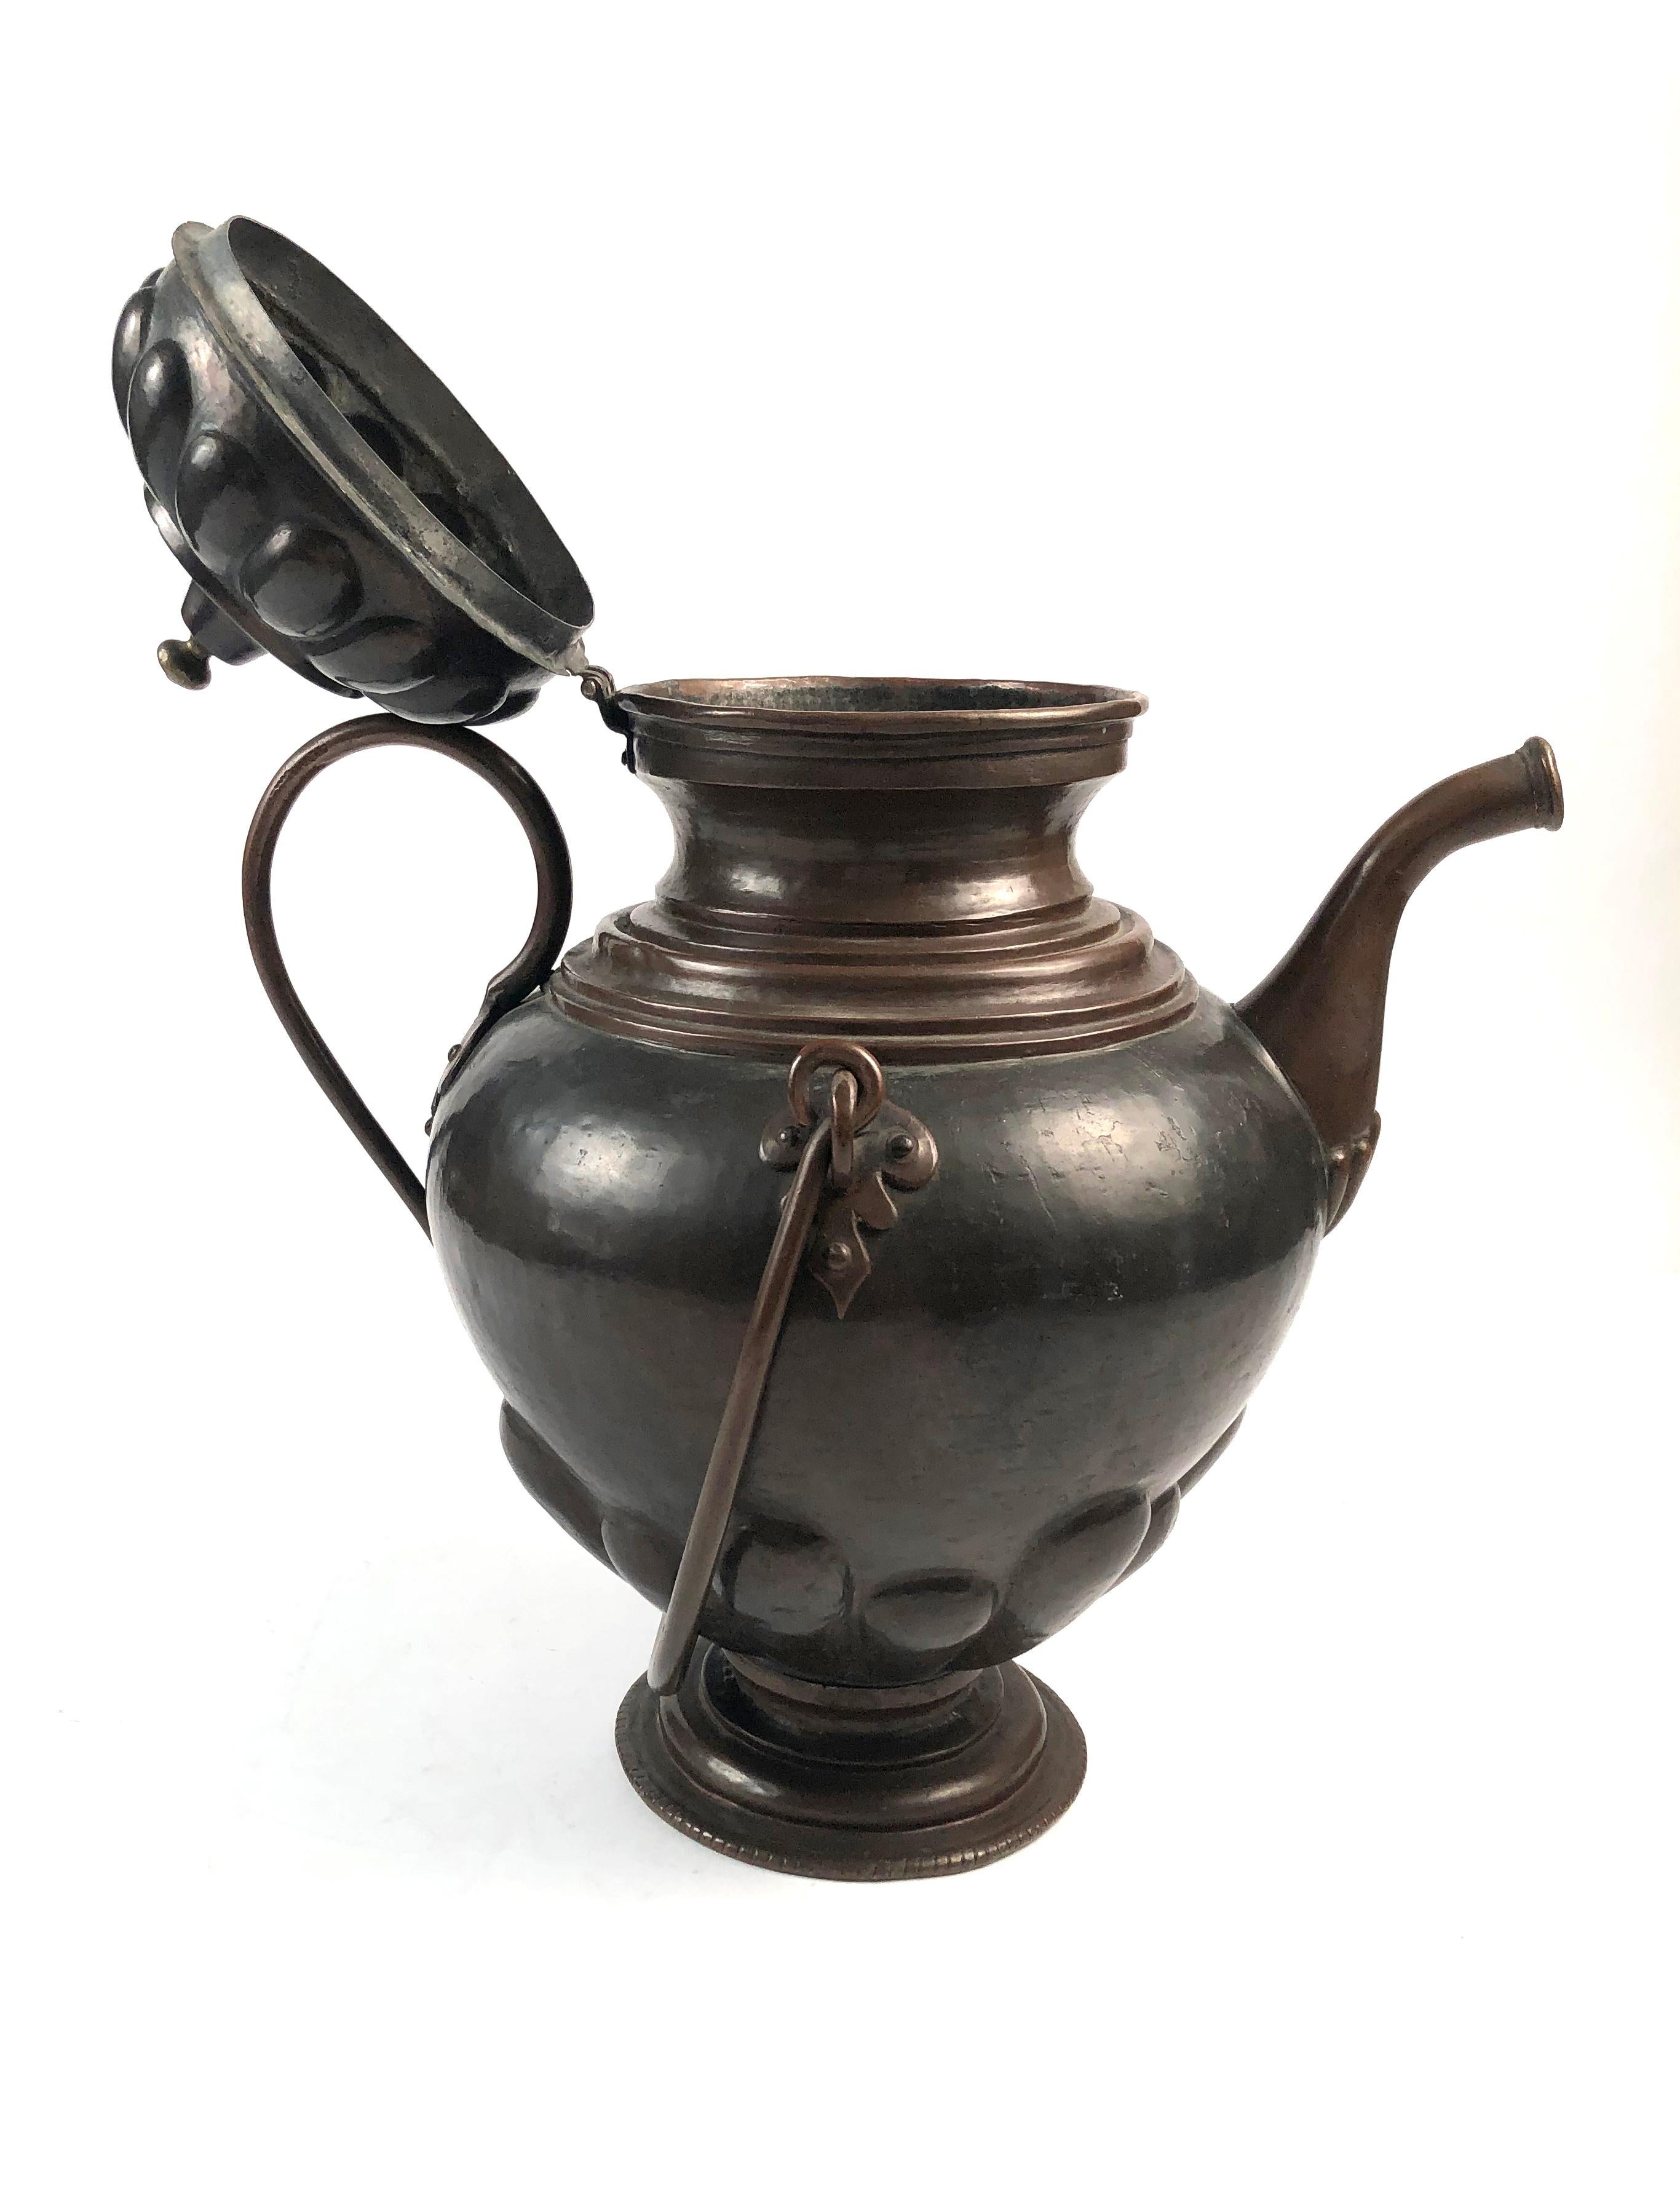 A handwrought beautifully detailed copper kettle with repousse gadrooned decoration on the lid and lower section, a fixed strap handle and swinging larger handle. Excellent form and patina.